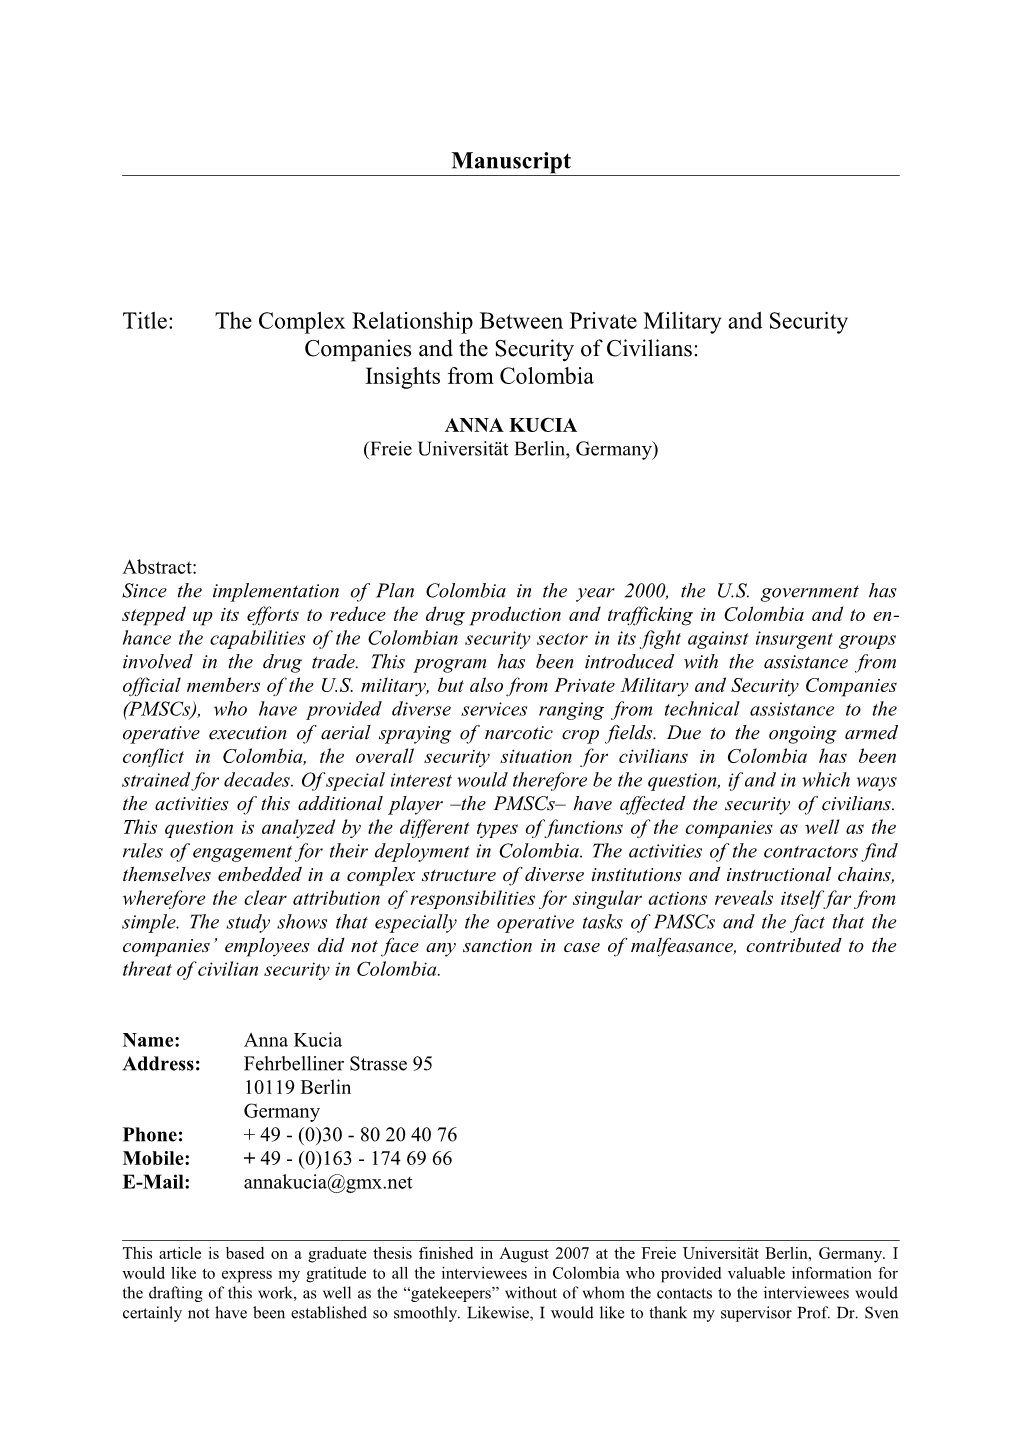 Title: the Complex Relationship Between Private Military and Security Companies and The